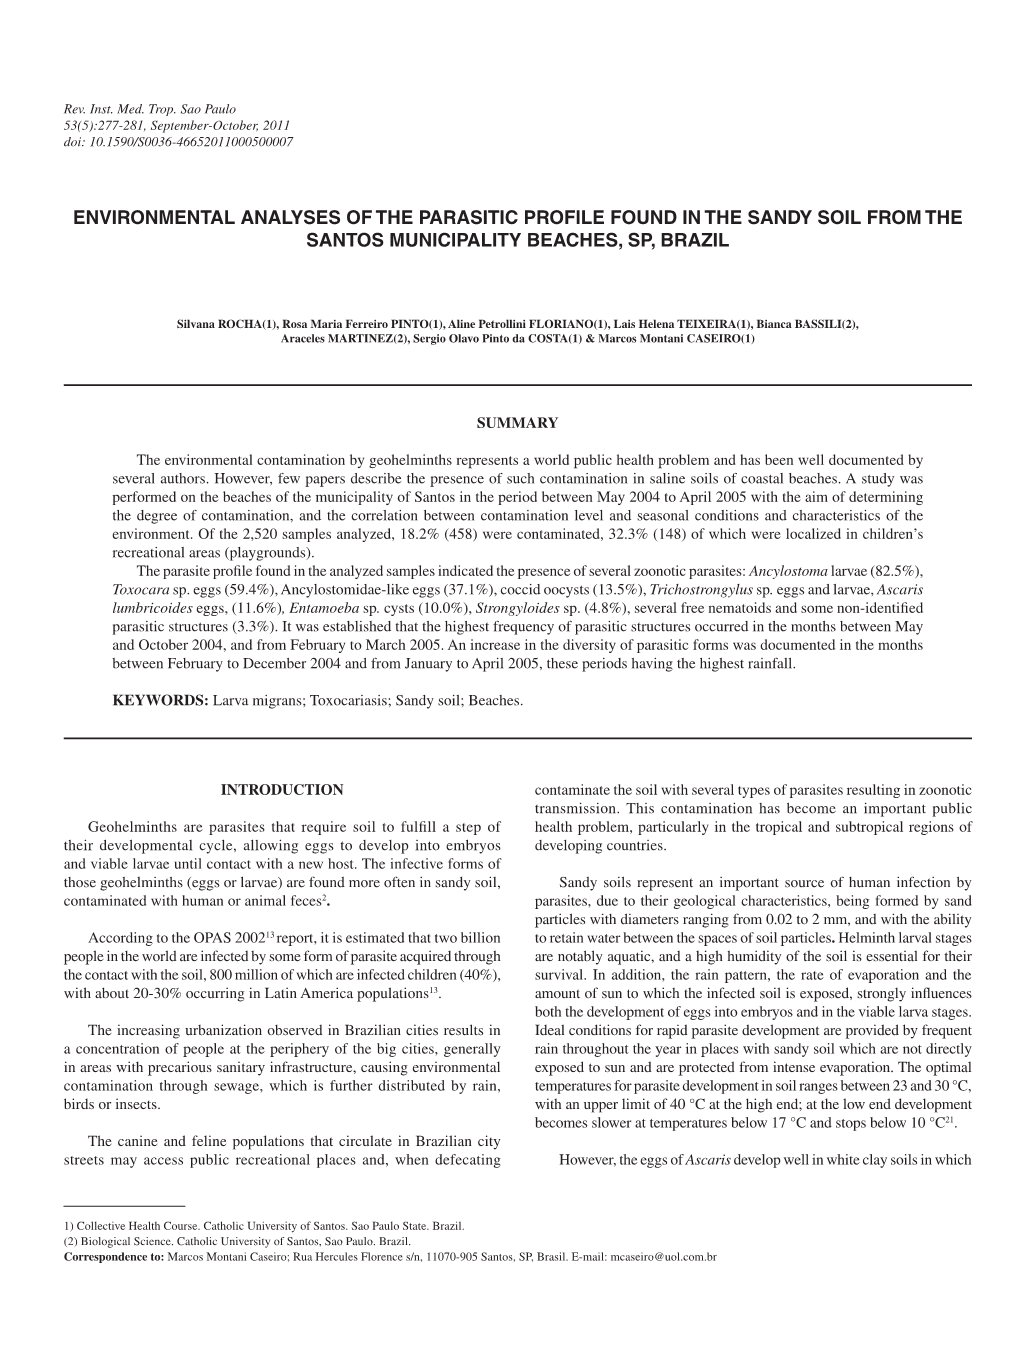 Environmental Analyses of the Parasitic Profile Found in the Sandy Soil from the Santos Municipality Beaches, Sp, Brazil